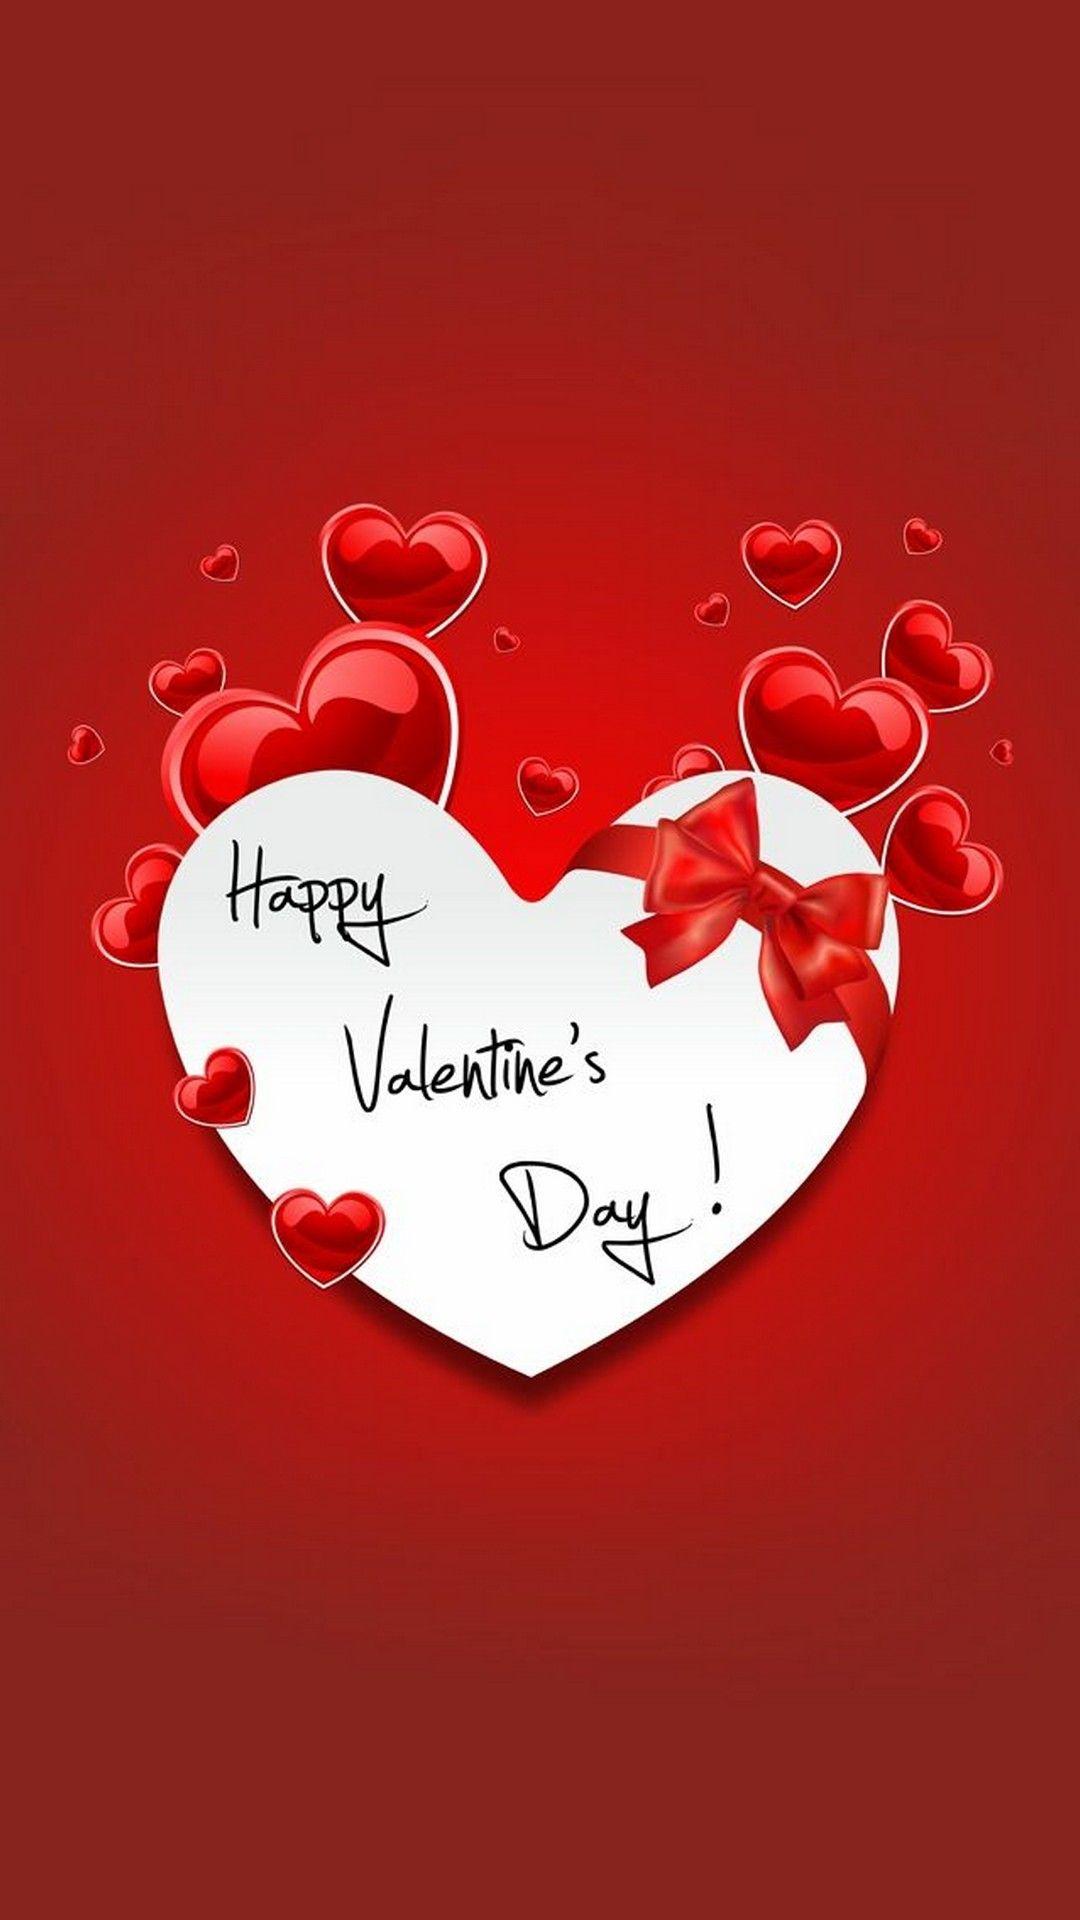 Wallpaper Happy Valentines Day Image Android Lock Screen